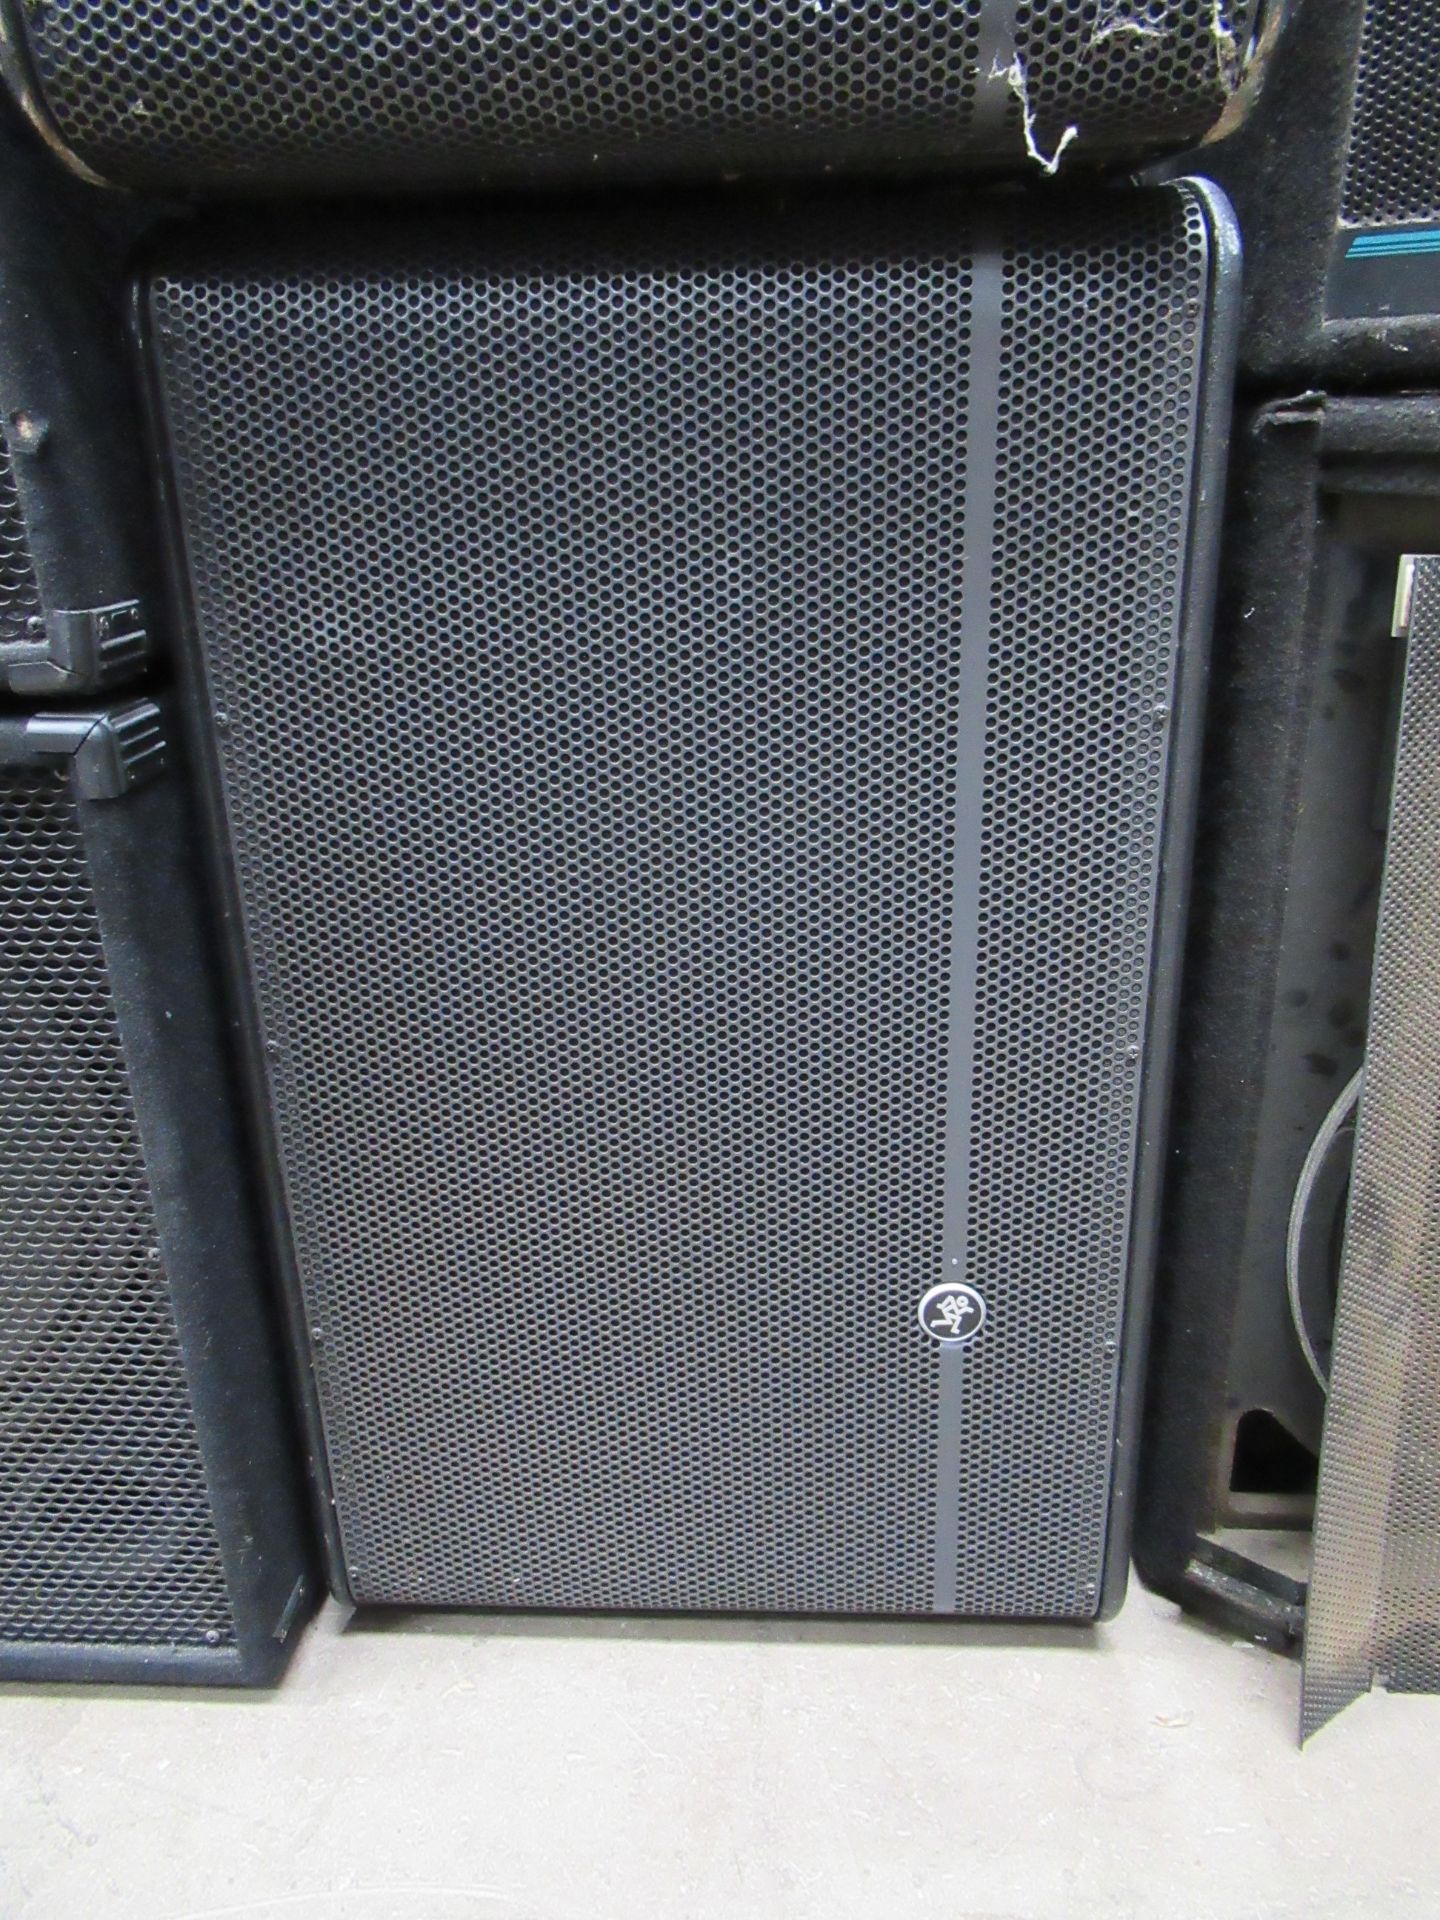 4x Speakers- 2x KAM ZP; 2x Mackie HD2521 and a Spider 11 30 Pre-Amp - Image 11 of 12